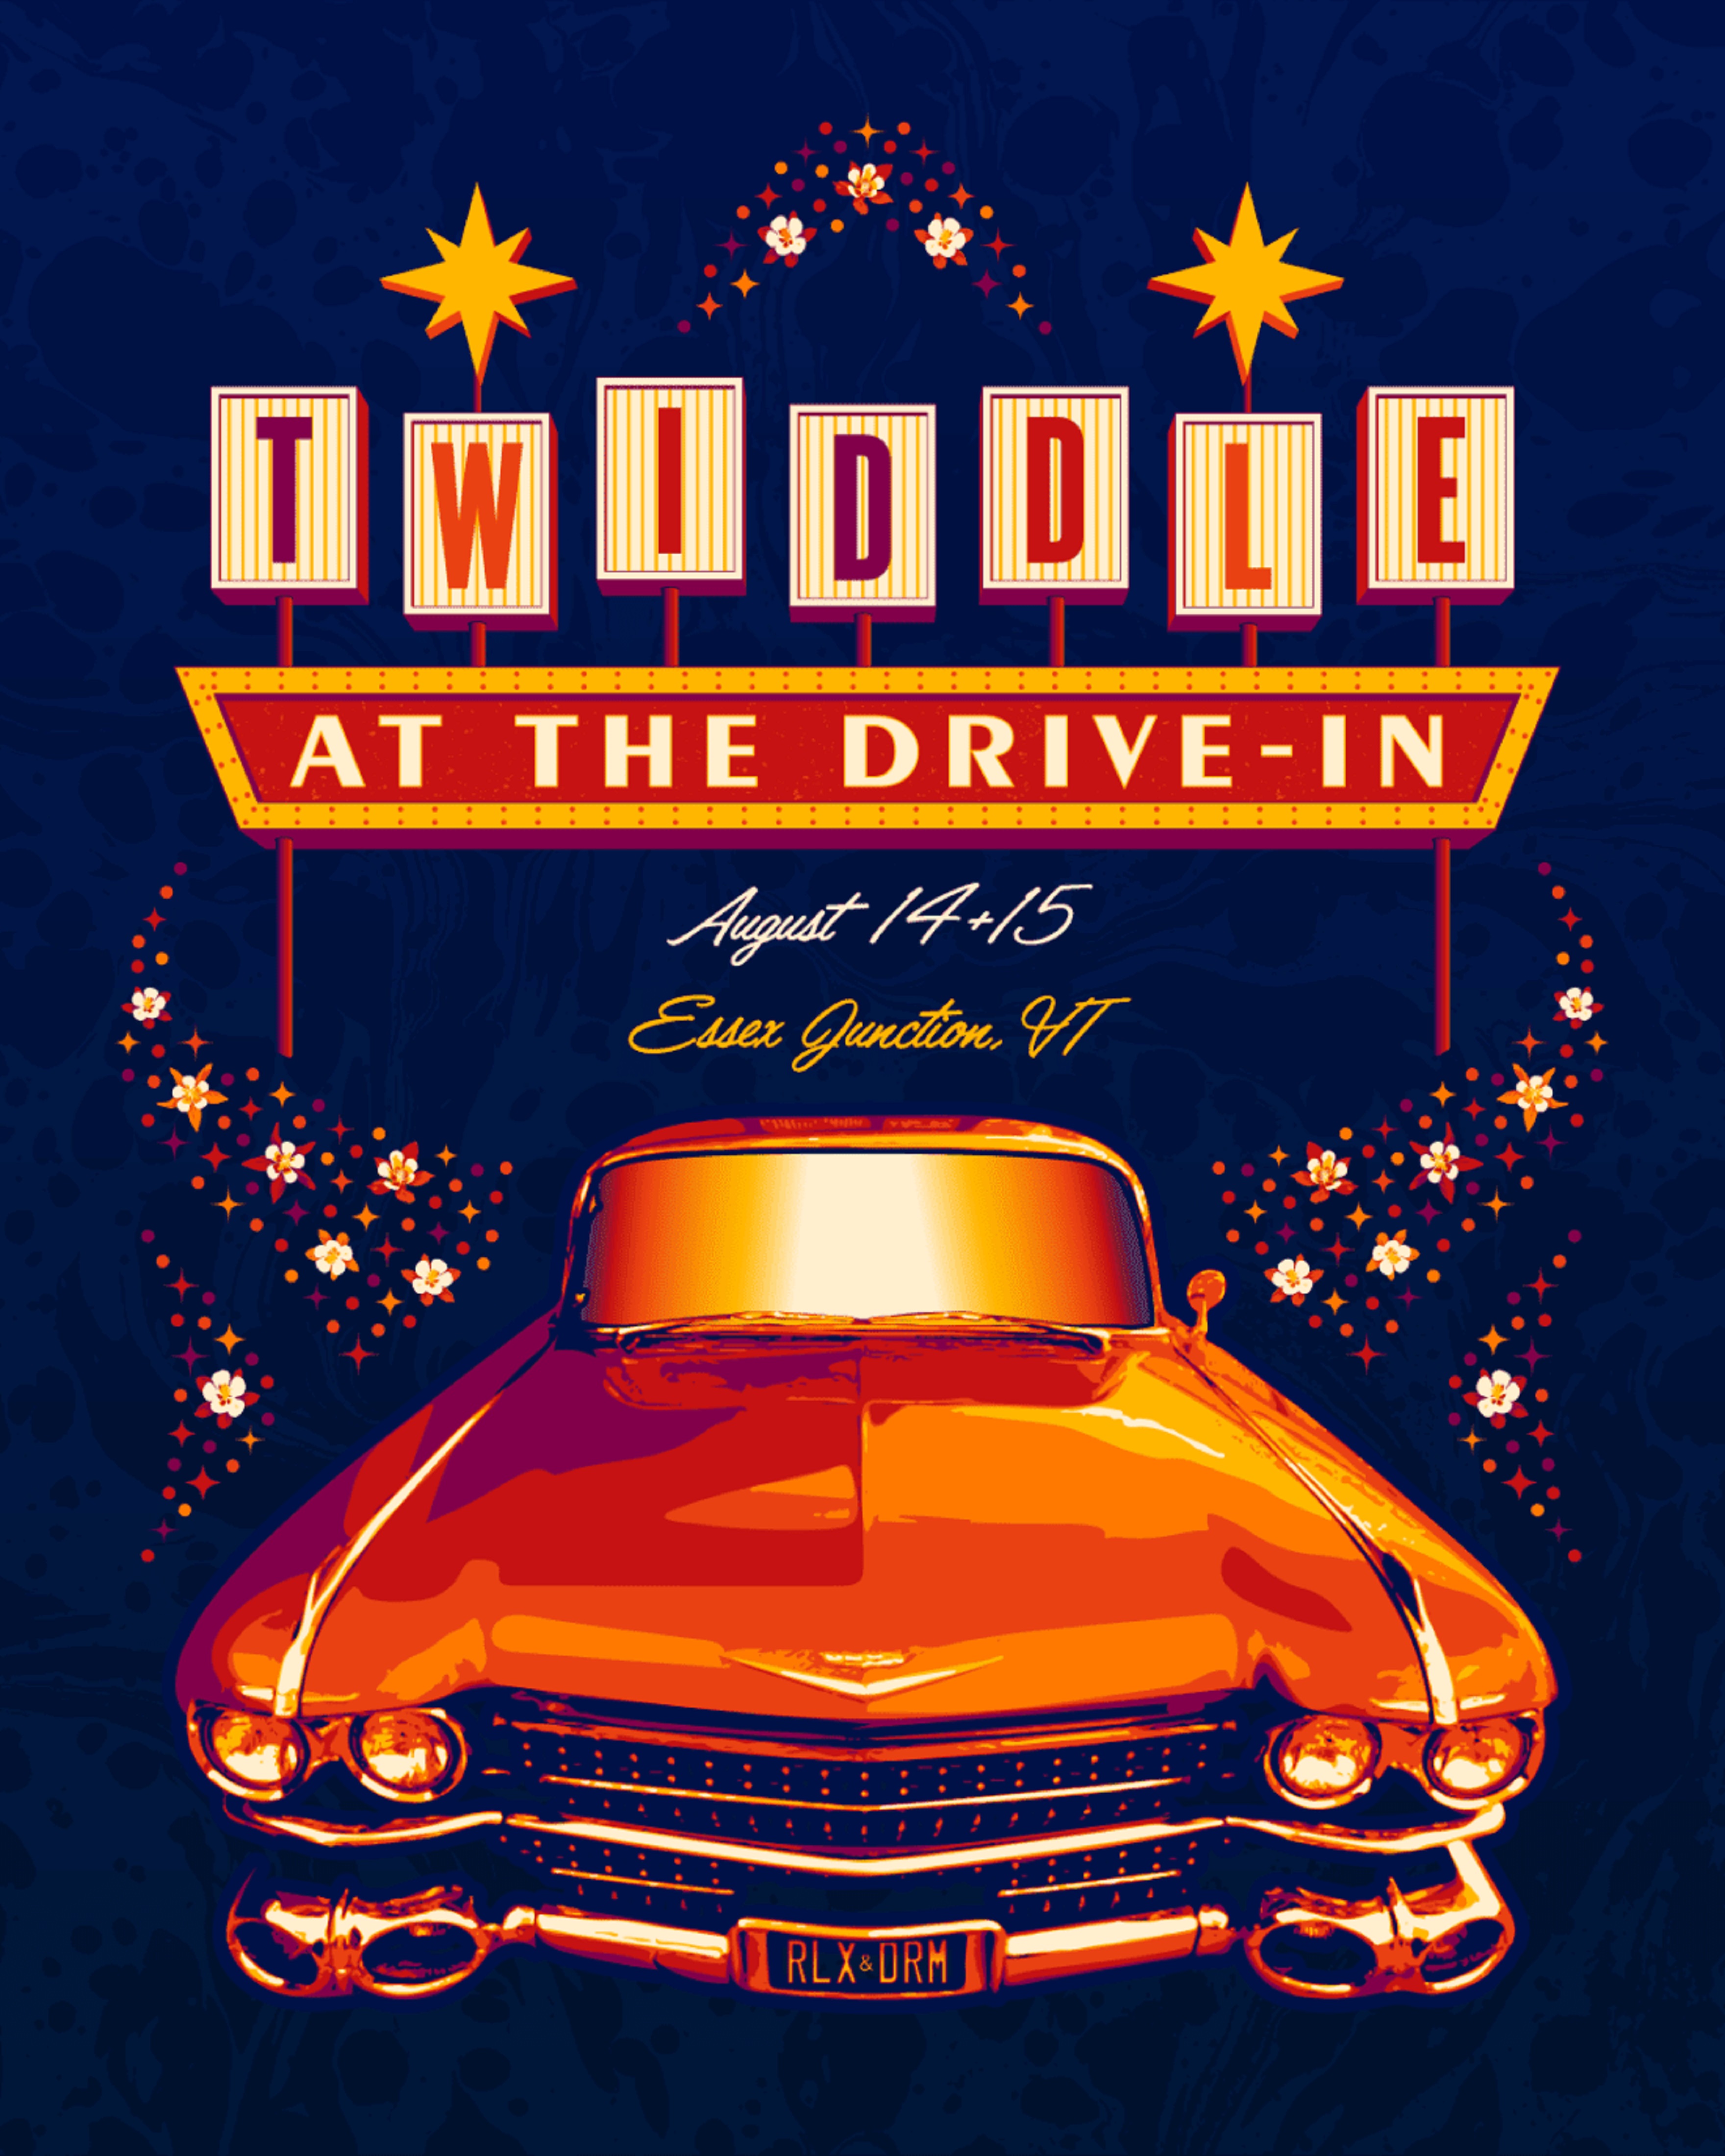 Twiddle live at the Higher Ground Drive-In Experience August 14 and 15